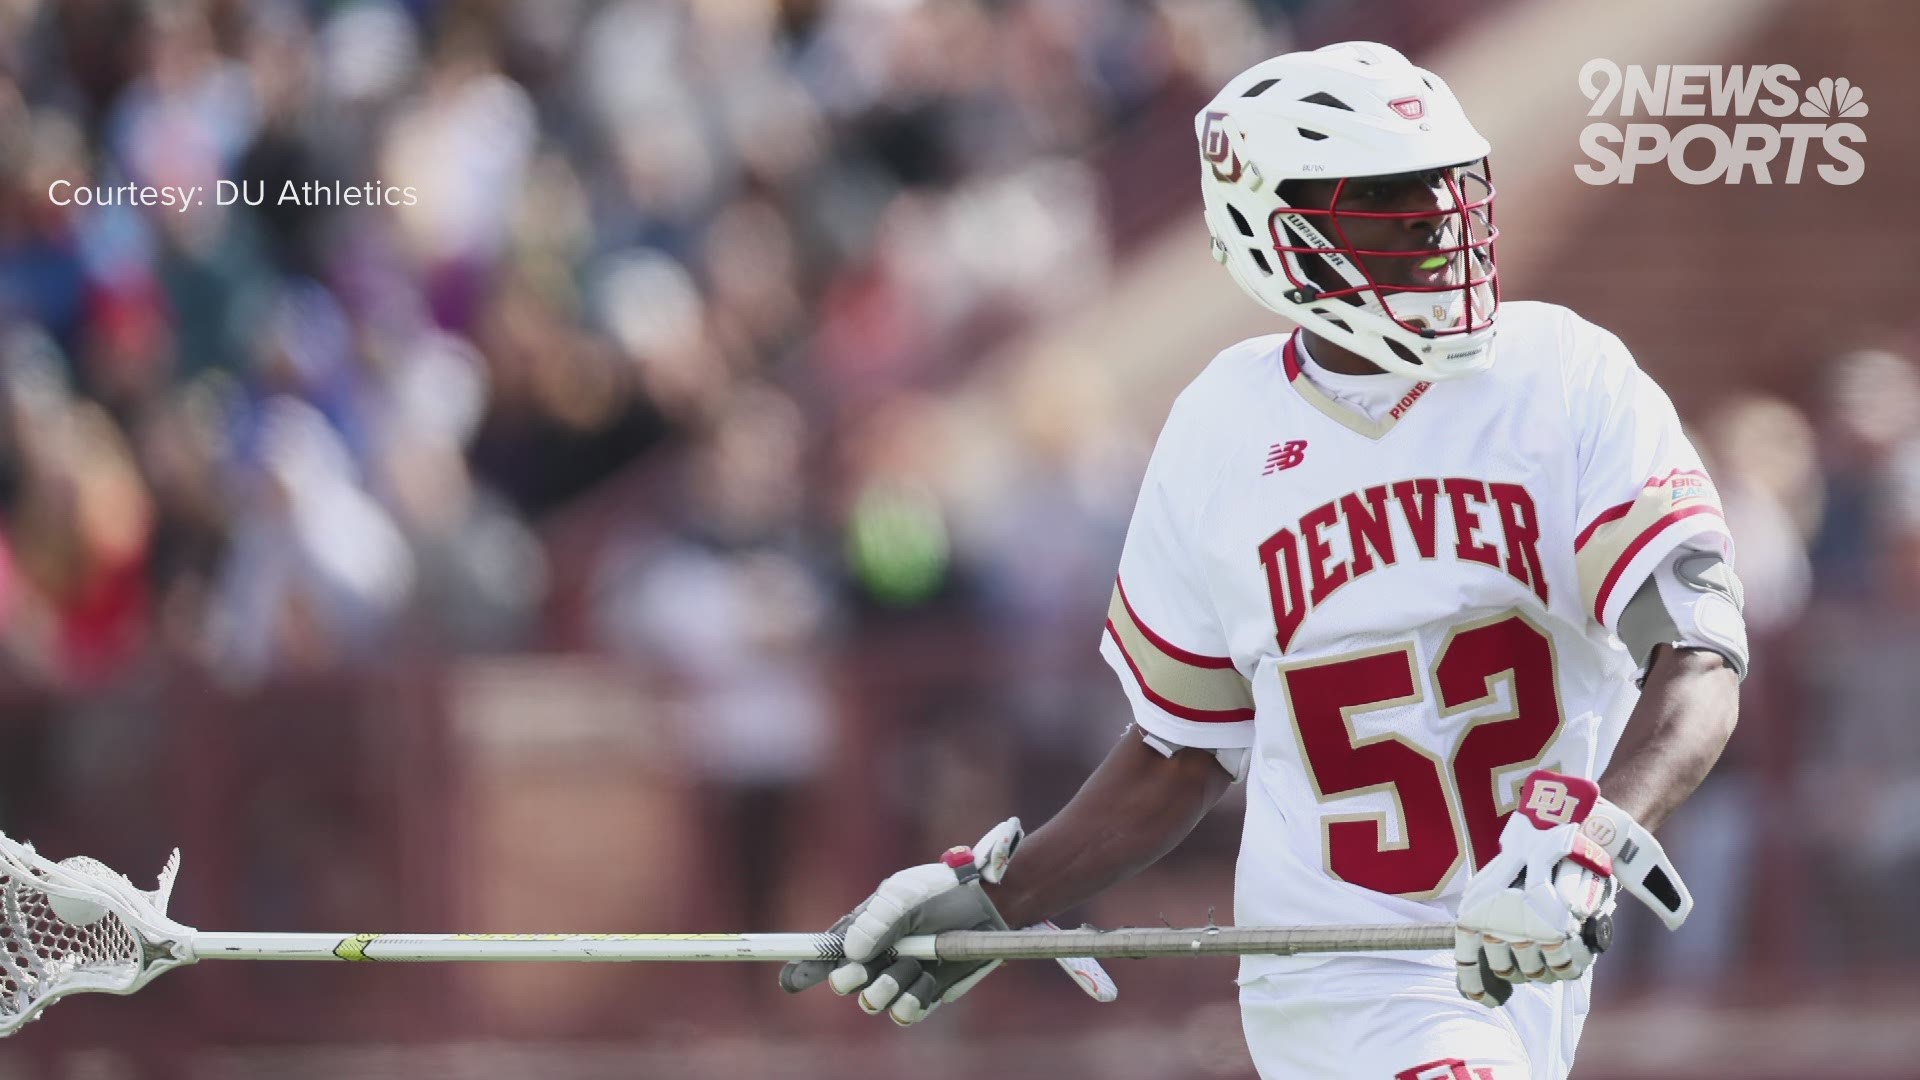 DU sophomore and Cherokee Trail graduate Malik Sparrow has seen the growth of his sport in the Denver Metro area. He hopes diversity and equity will soon follow.